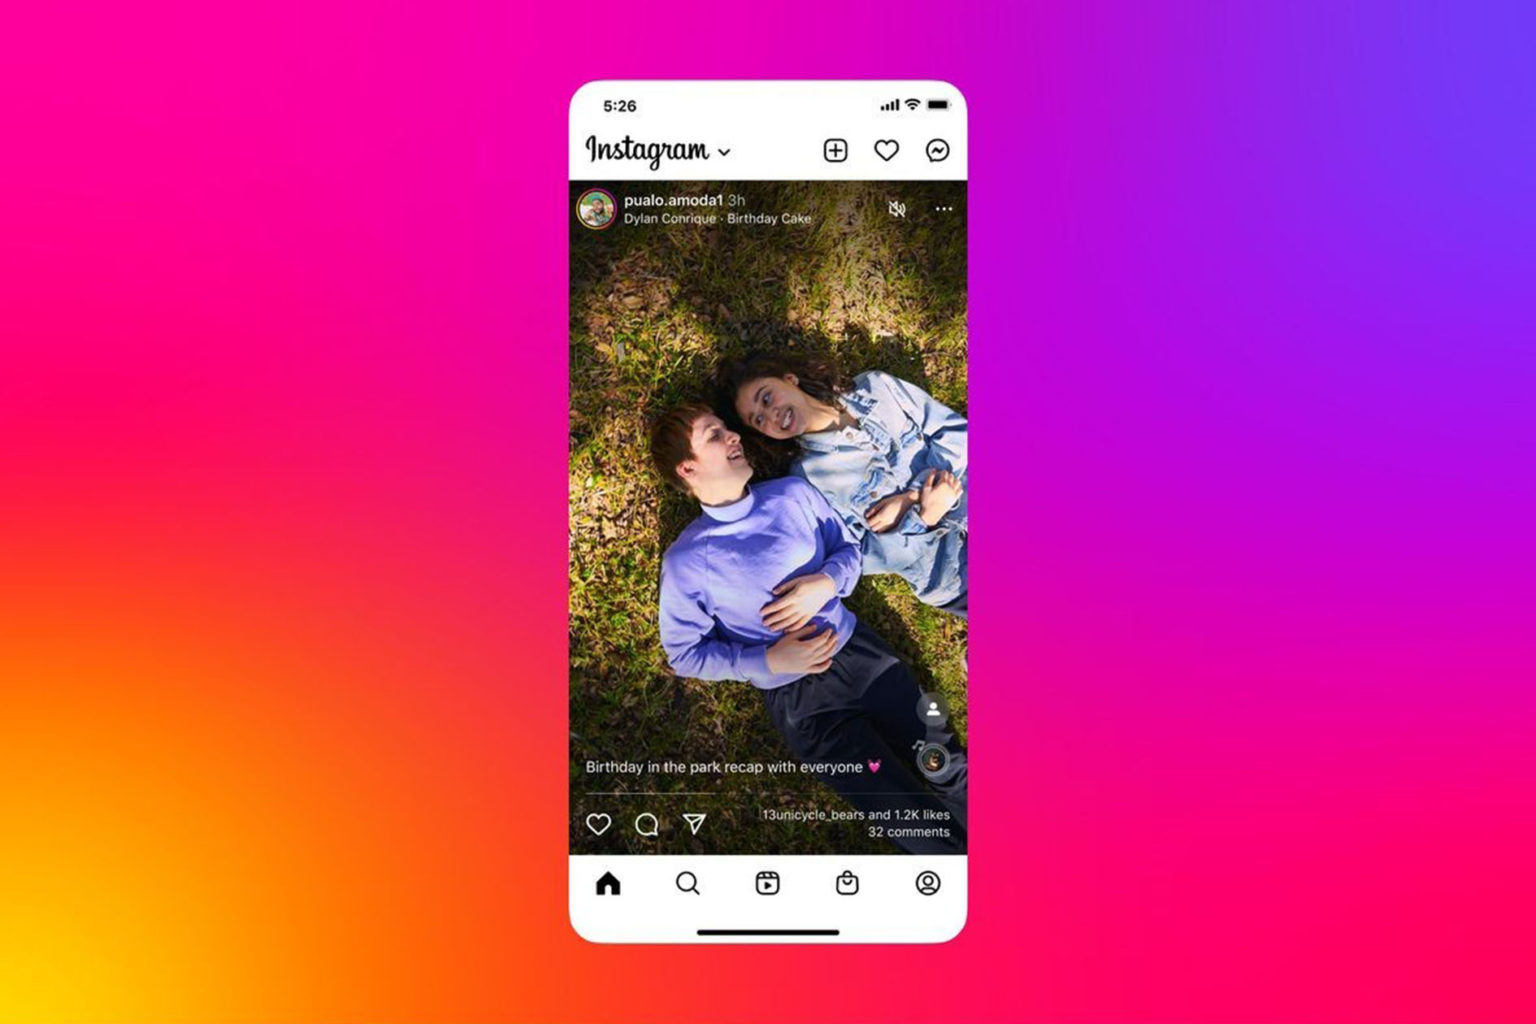 How to Get Verified on Instagram in 2023 [6 Simple Steps]